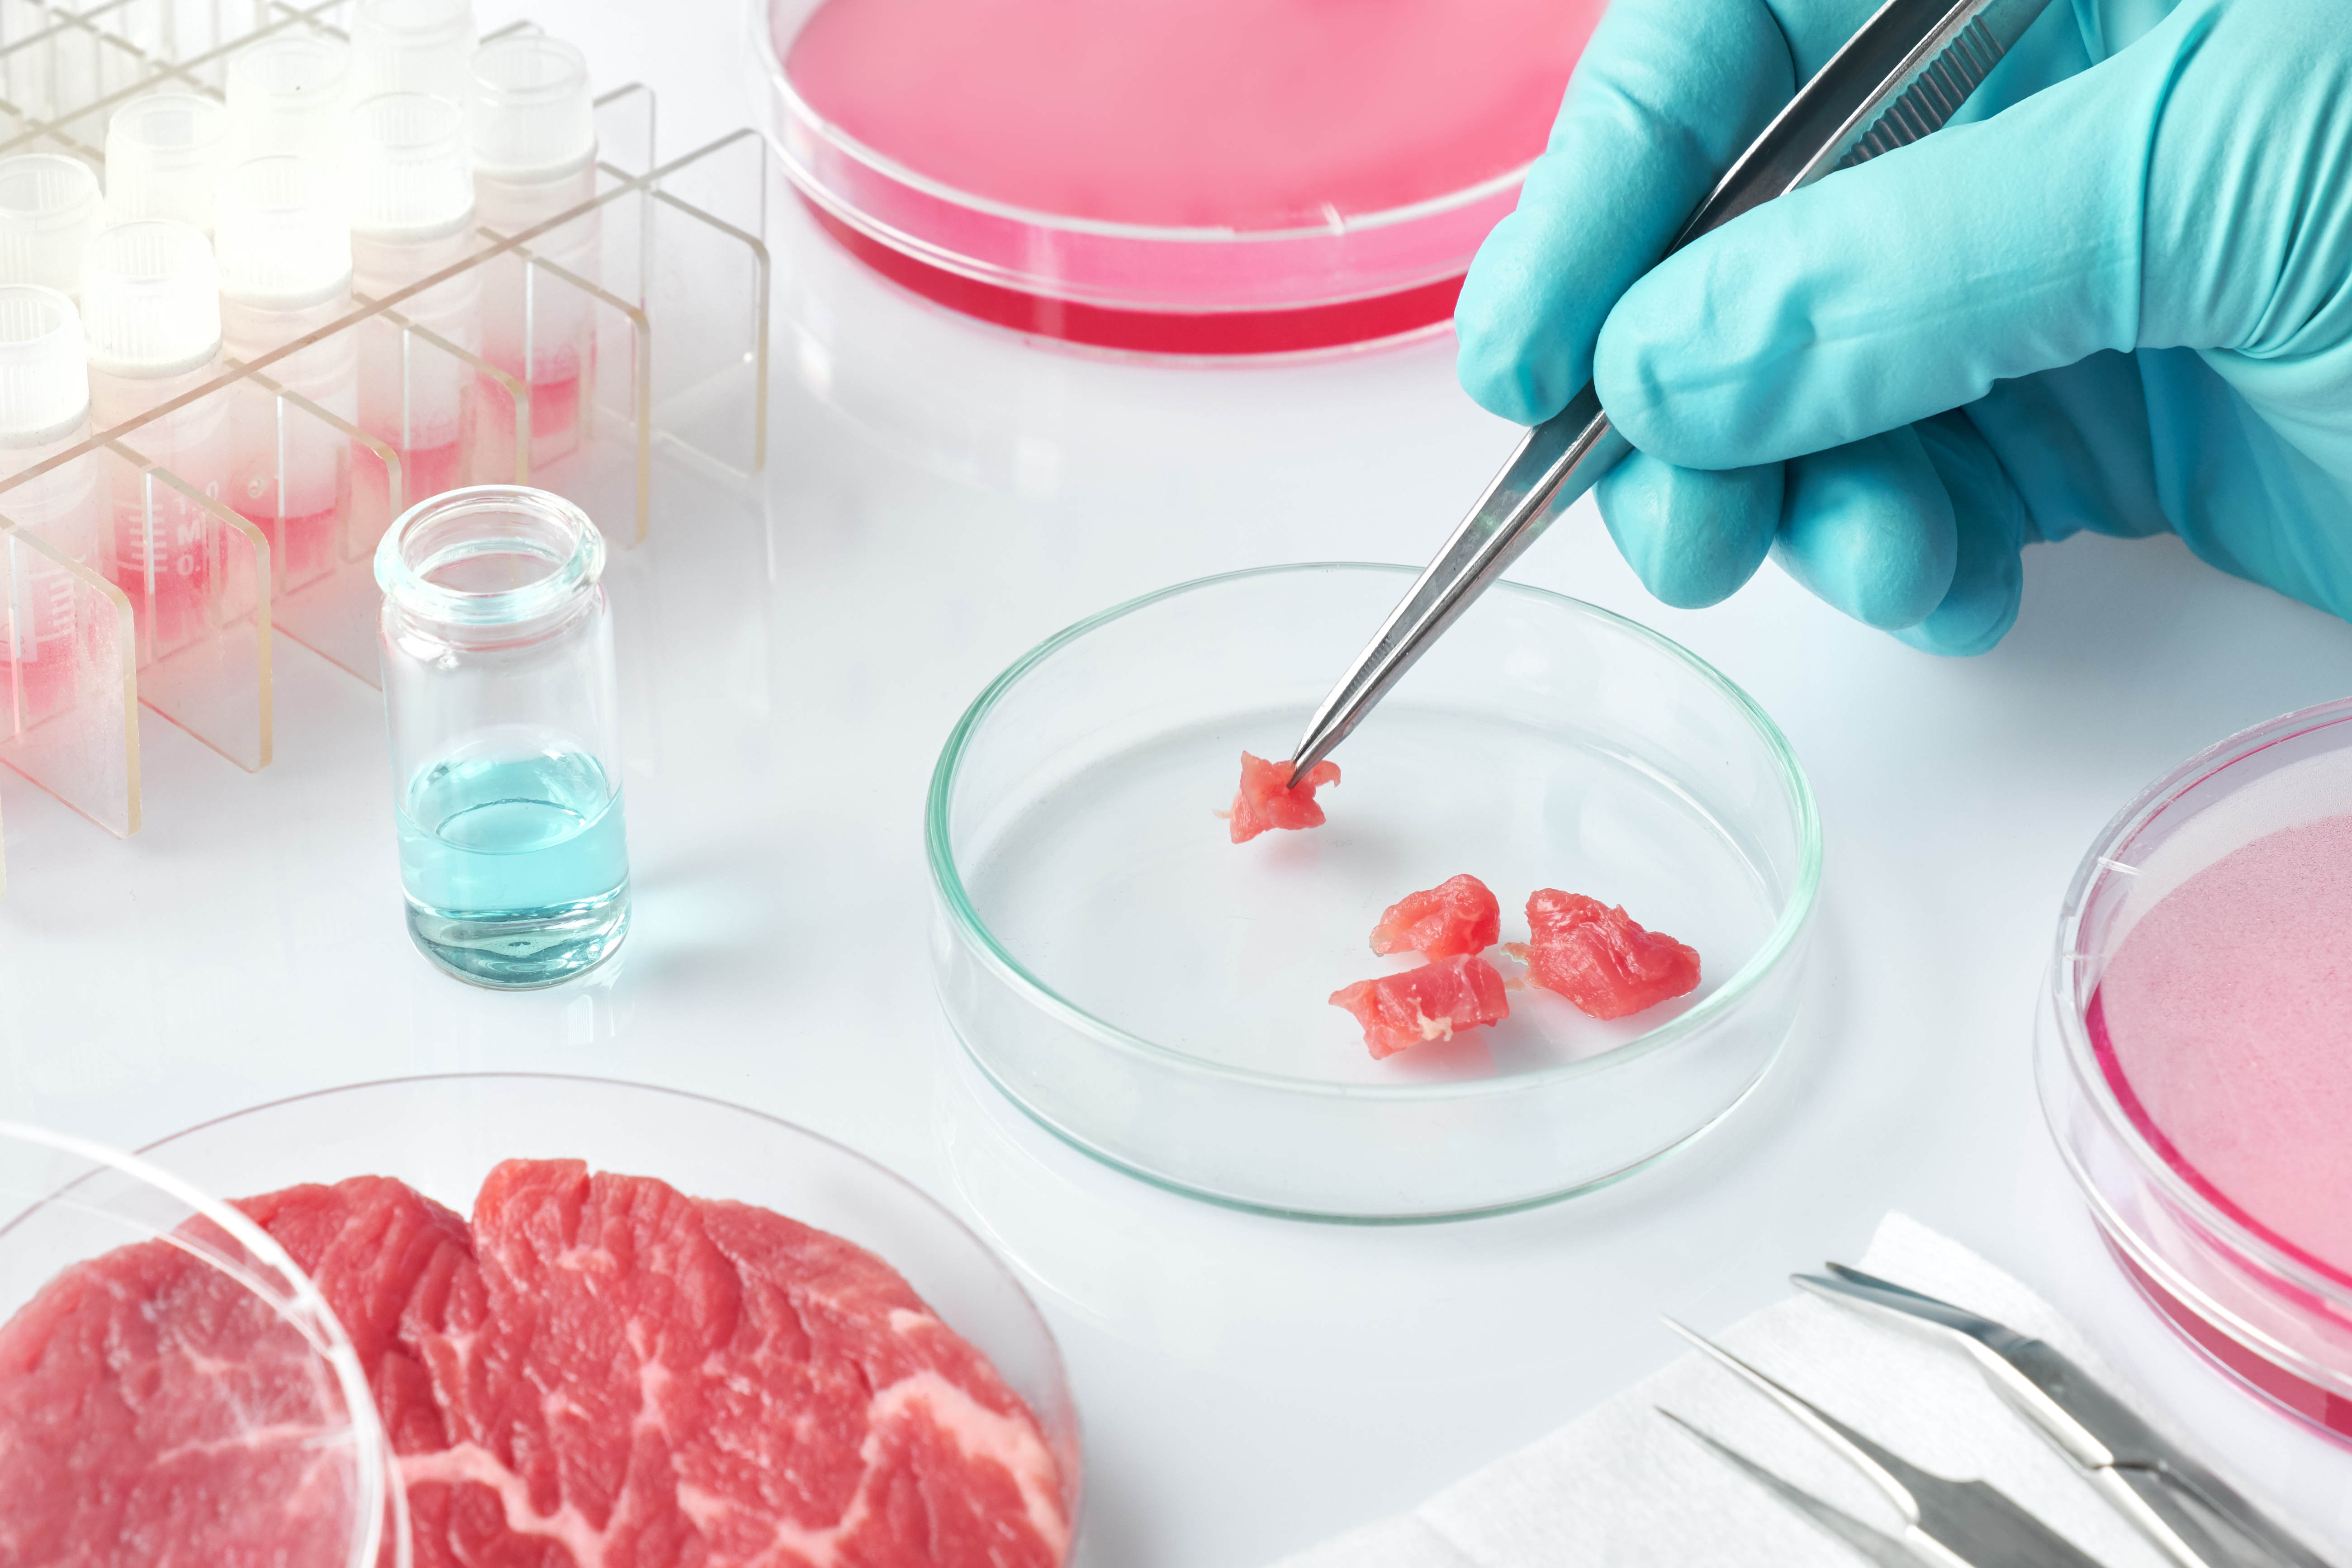 Growing cultivated meat remains at laboratory scale, and before this new food can reach the supermarket, the cost of production needs to decrease further still. (Copyright (c) 2019 tilialucida/Shutterstock)